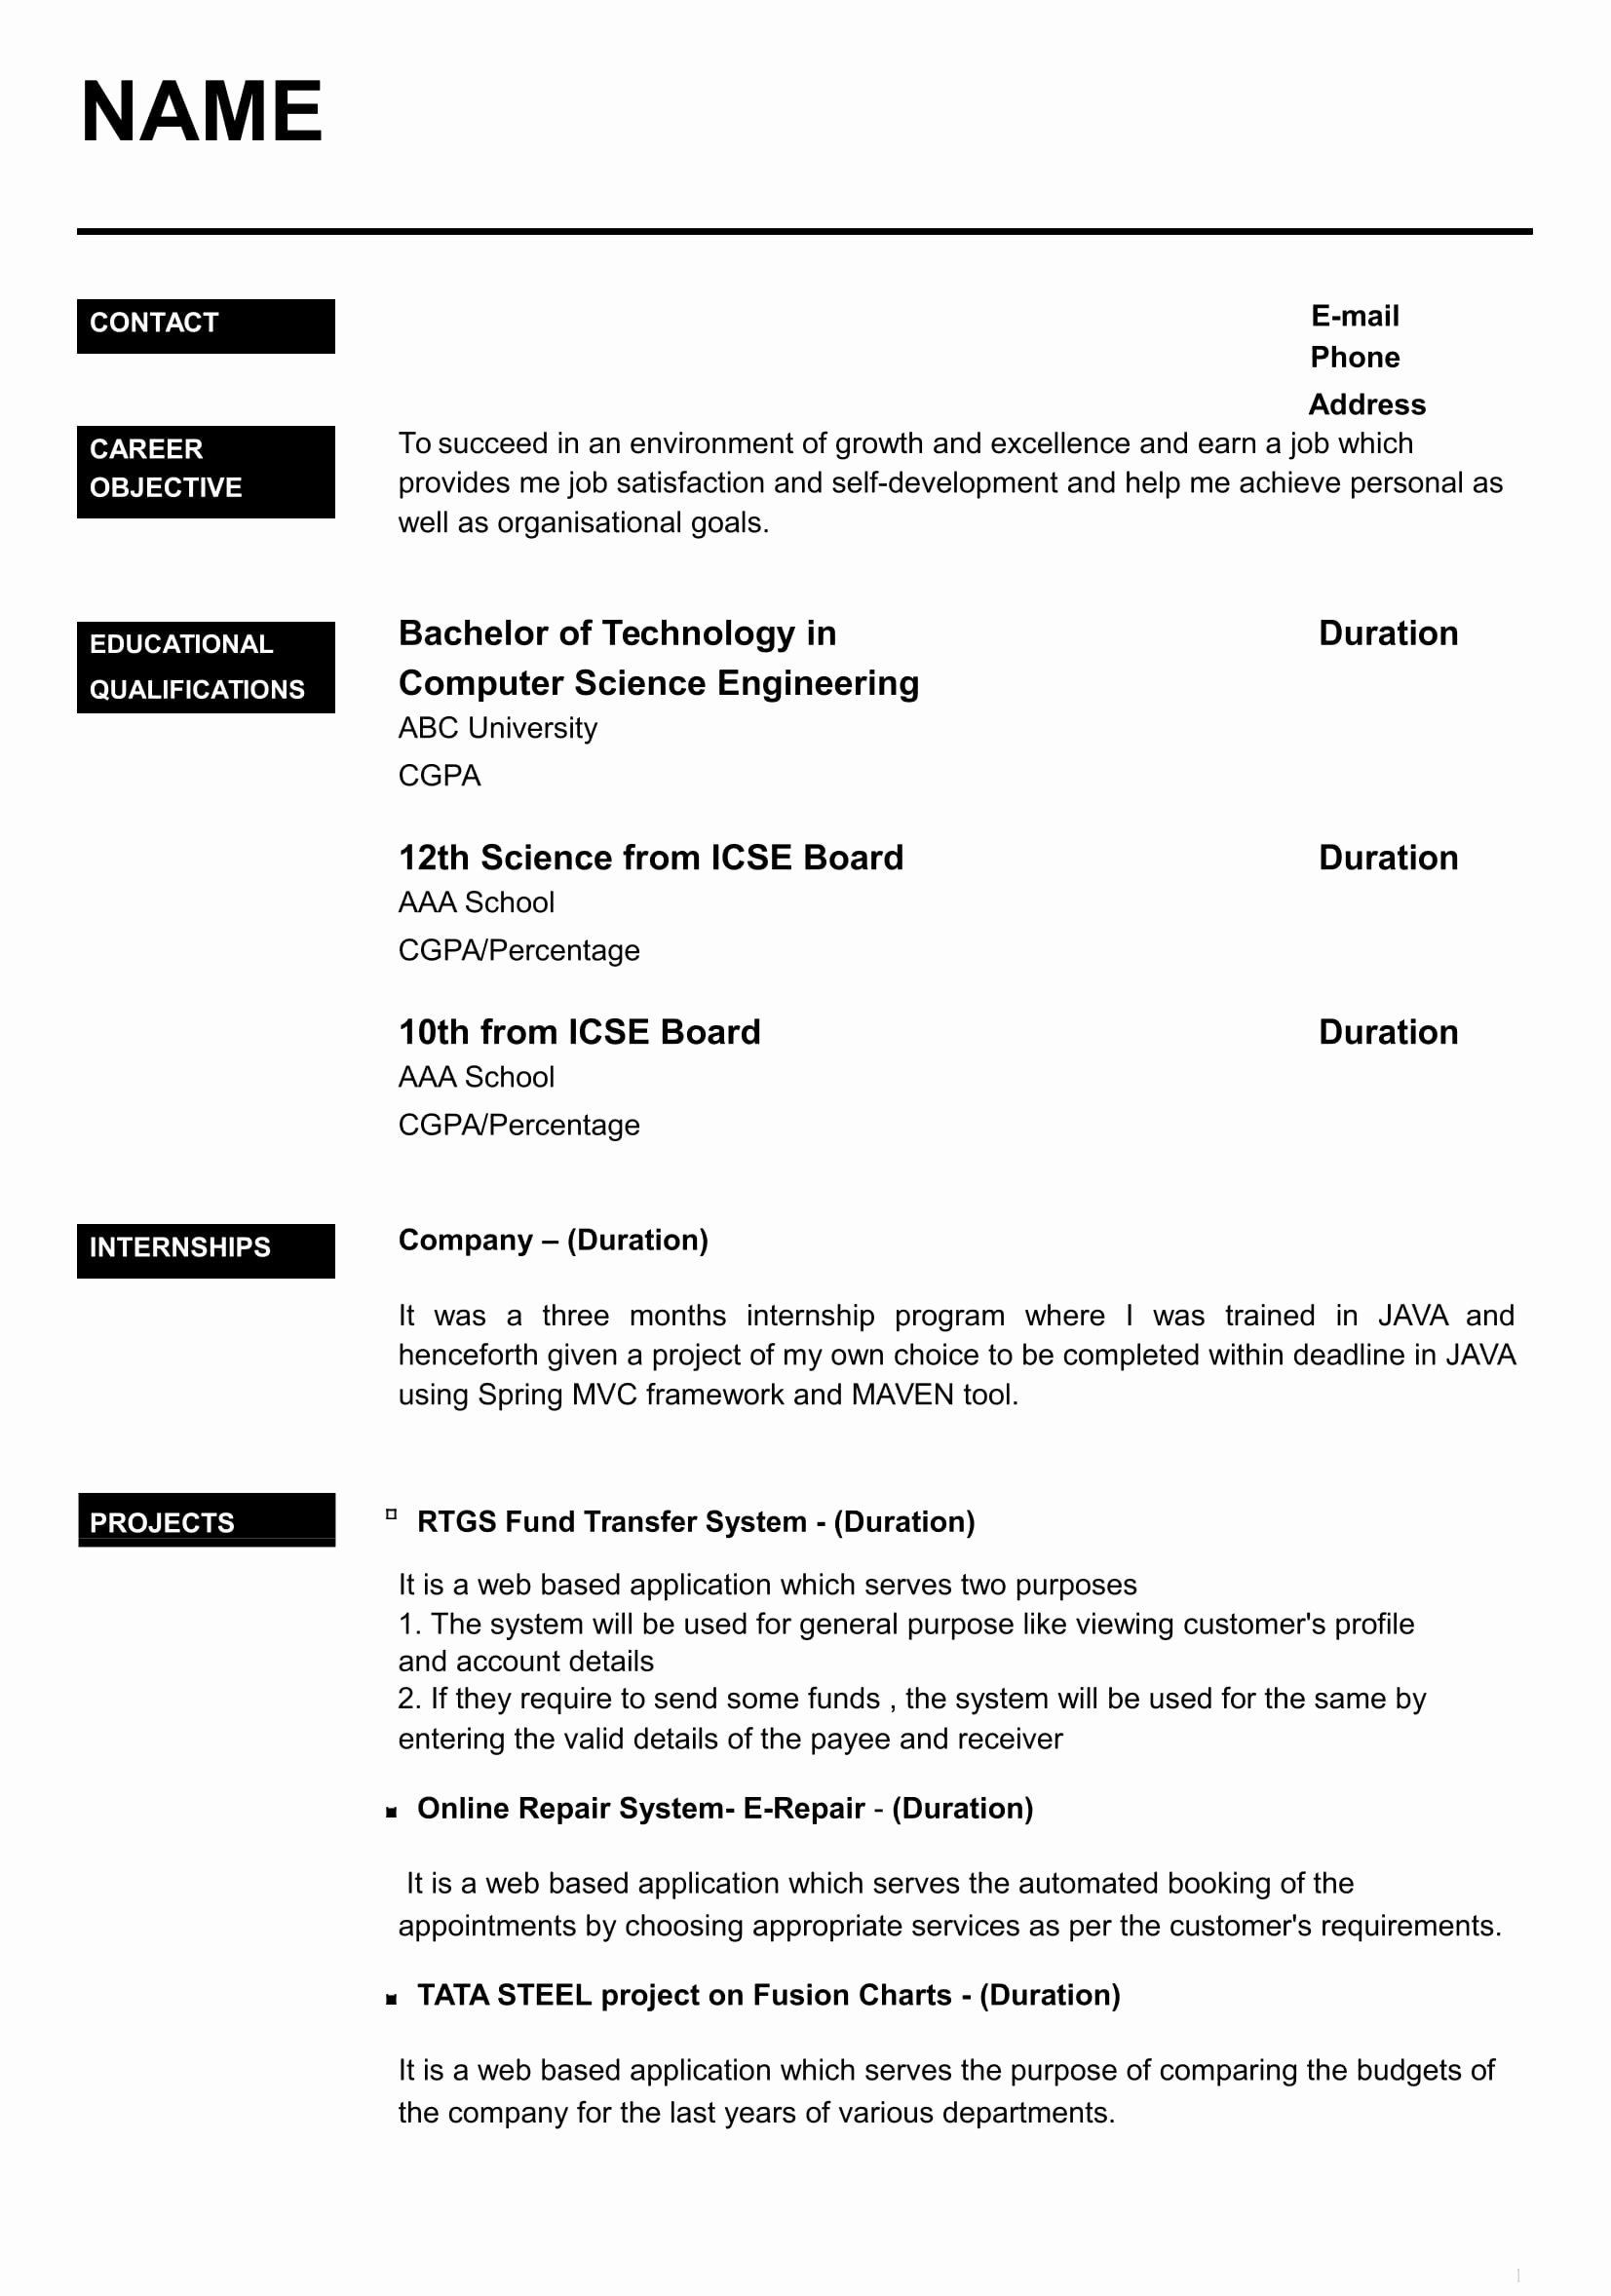 Sample Resume for Freshers Engineers Computer Science Pdf Resume with Picture Template New 32 Resume Templates for Freshers …